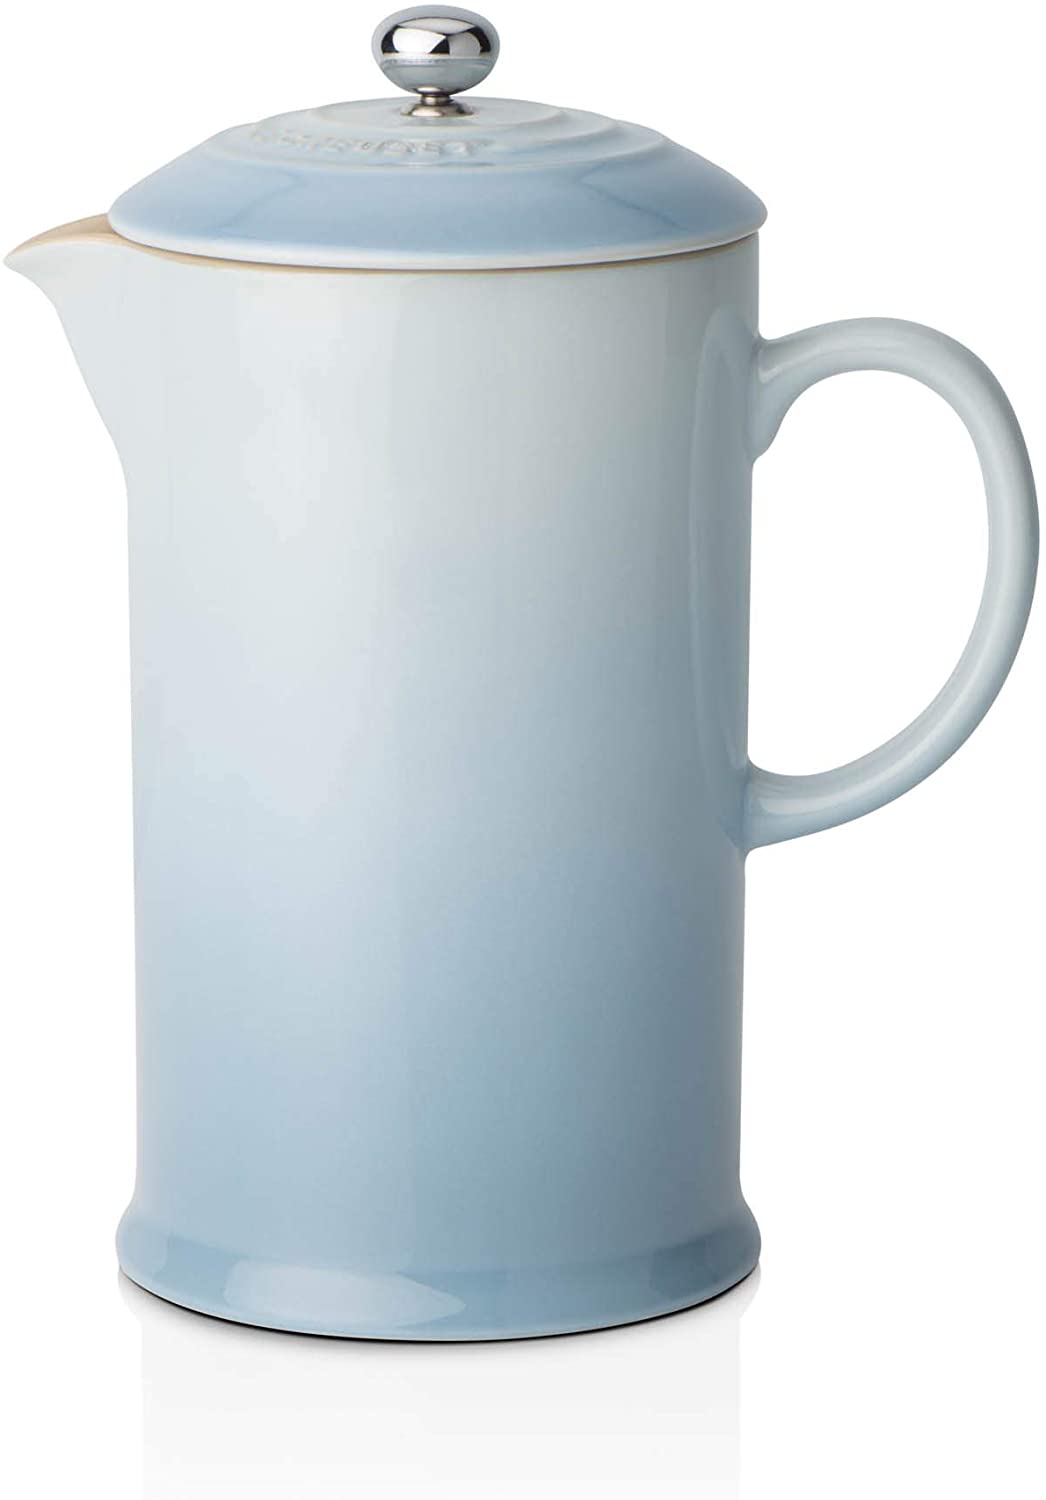 Le Creuset French Press Coffee Maker with Stainless Steel Press Insert 800 ml Stoneware, Sea Blue, 750 ml